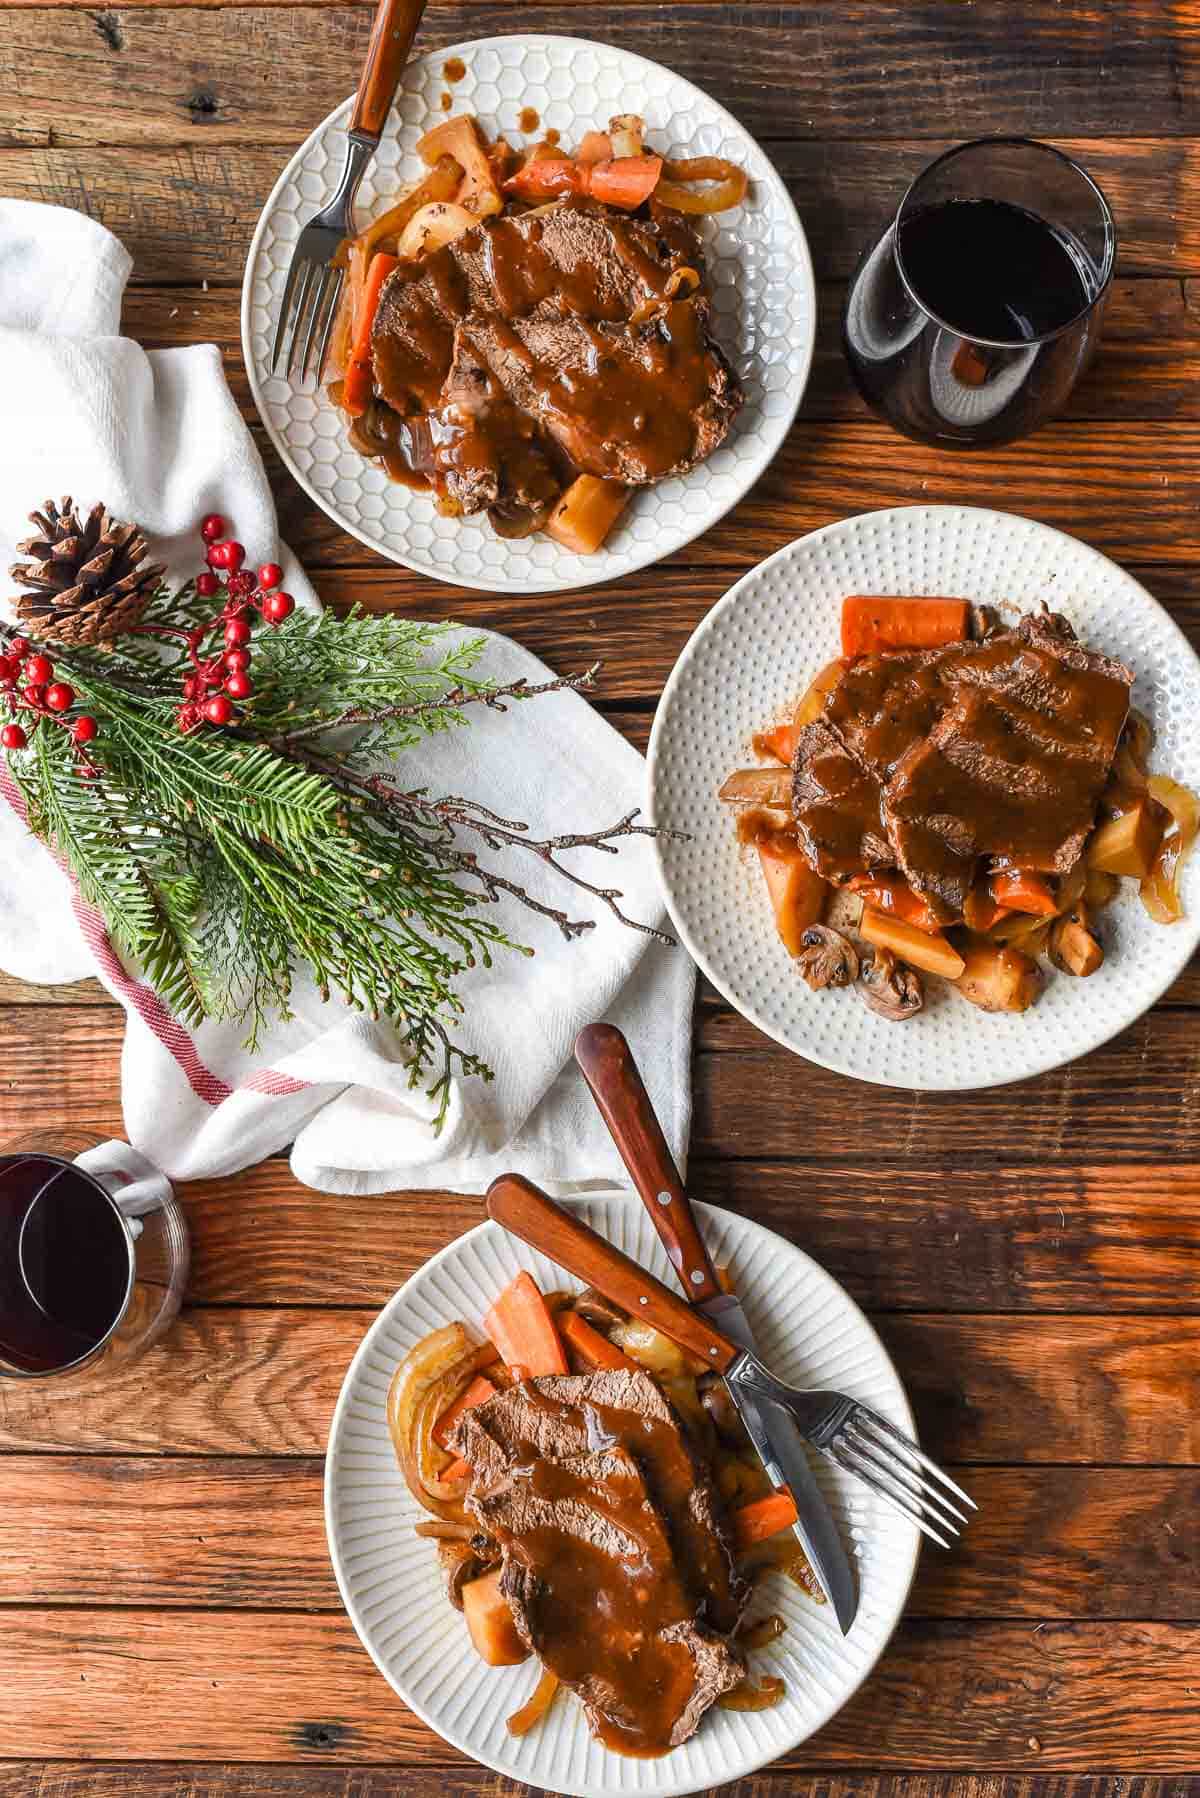 This Slow Cooker Balsamic Roast is an easy but gorgeous meal to serve for the holidays. We love it with onions, carrots, and mushrooms!